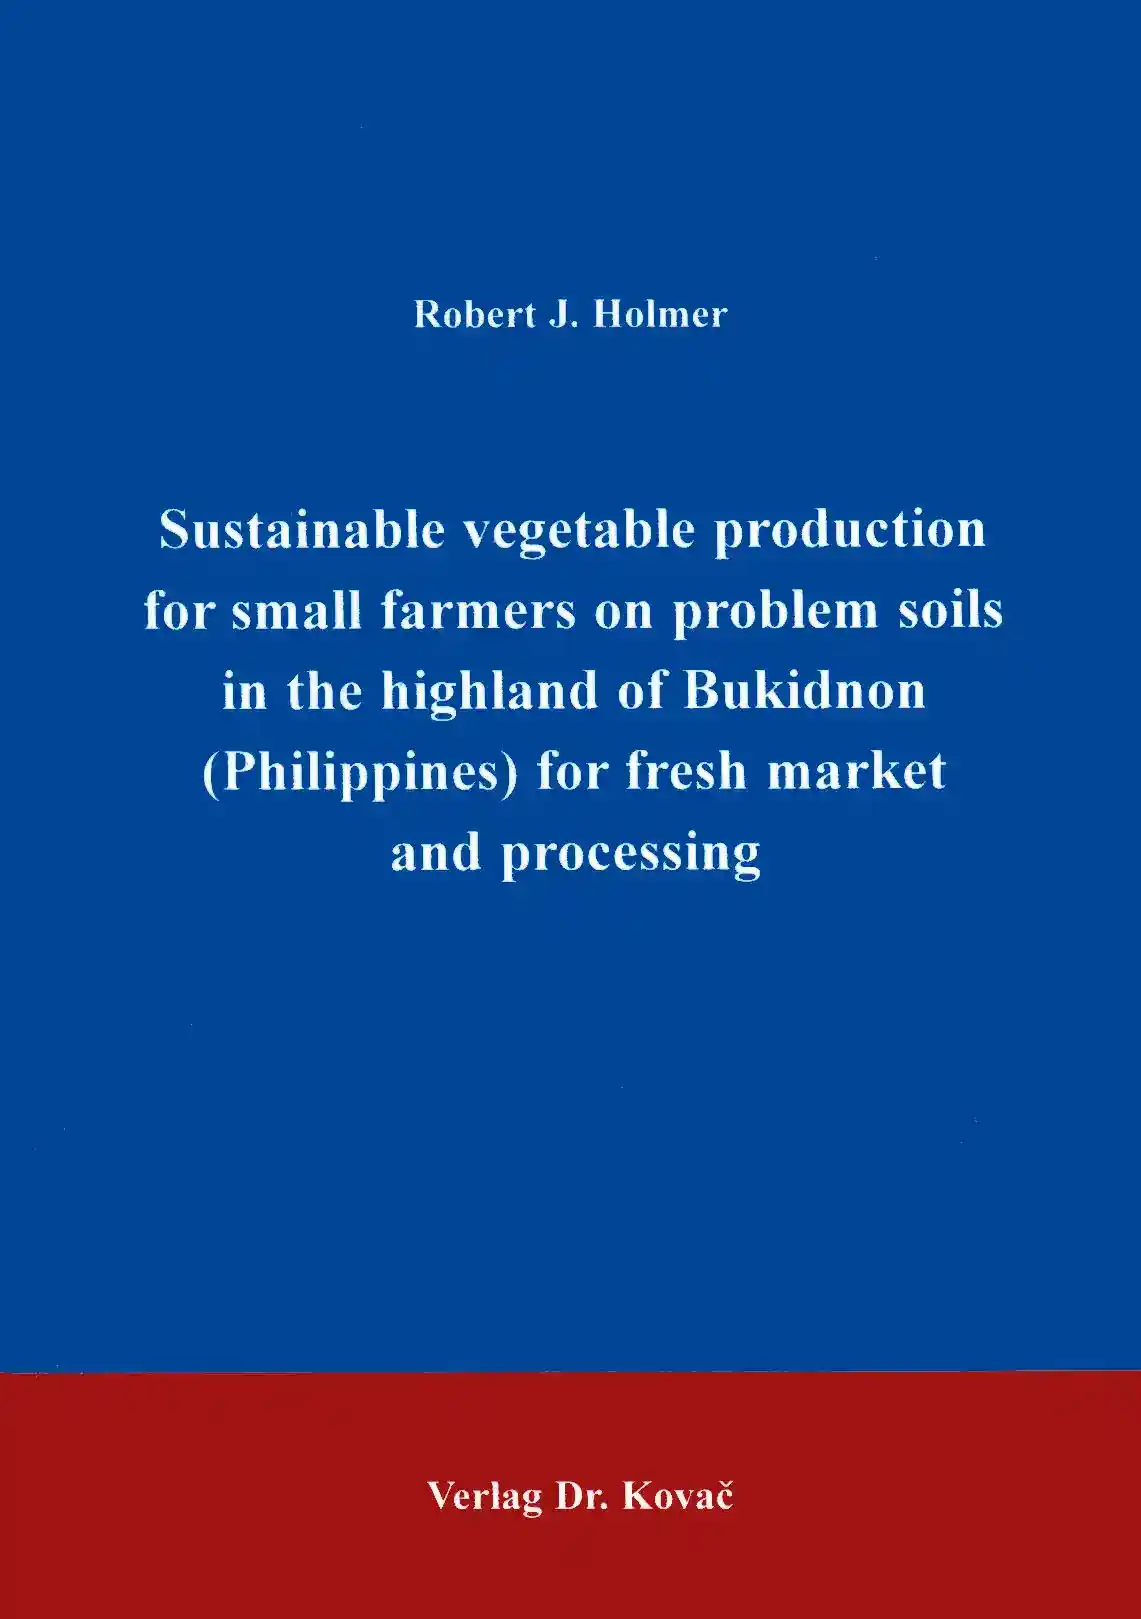 Sustainable vegetable production for small farmers on problem soils in the highland of Bukidnon (Philippines) for fresh market and processing (Forschungsarbeit)